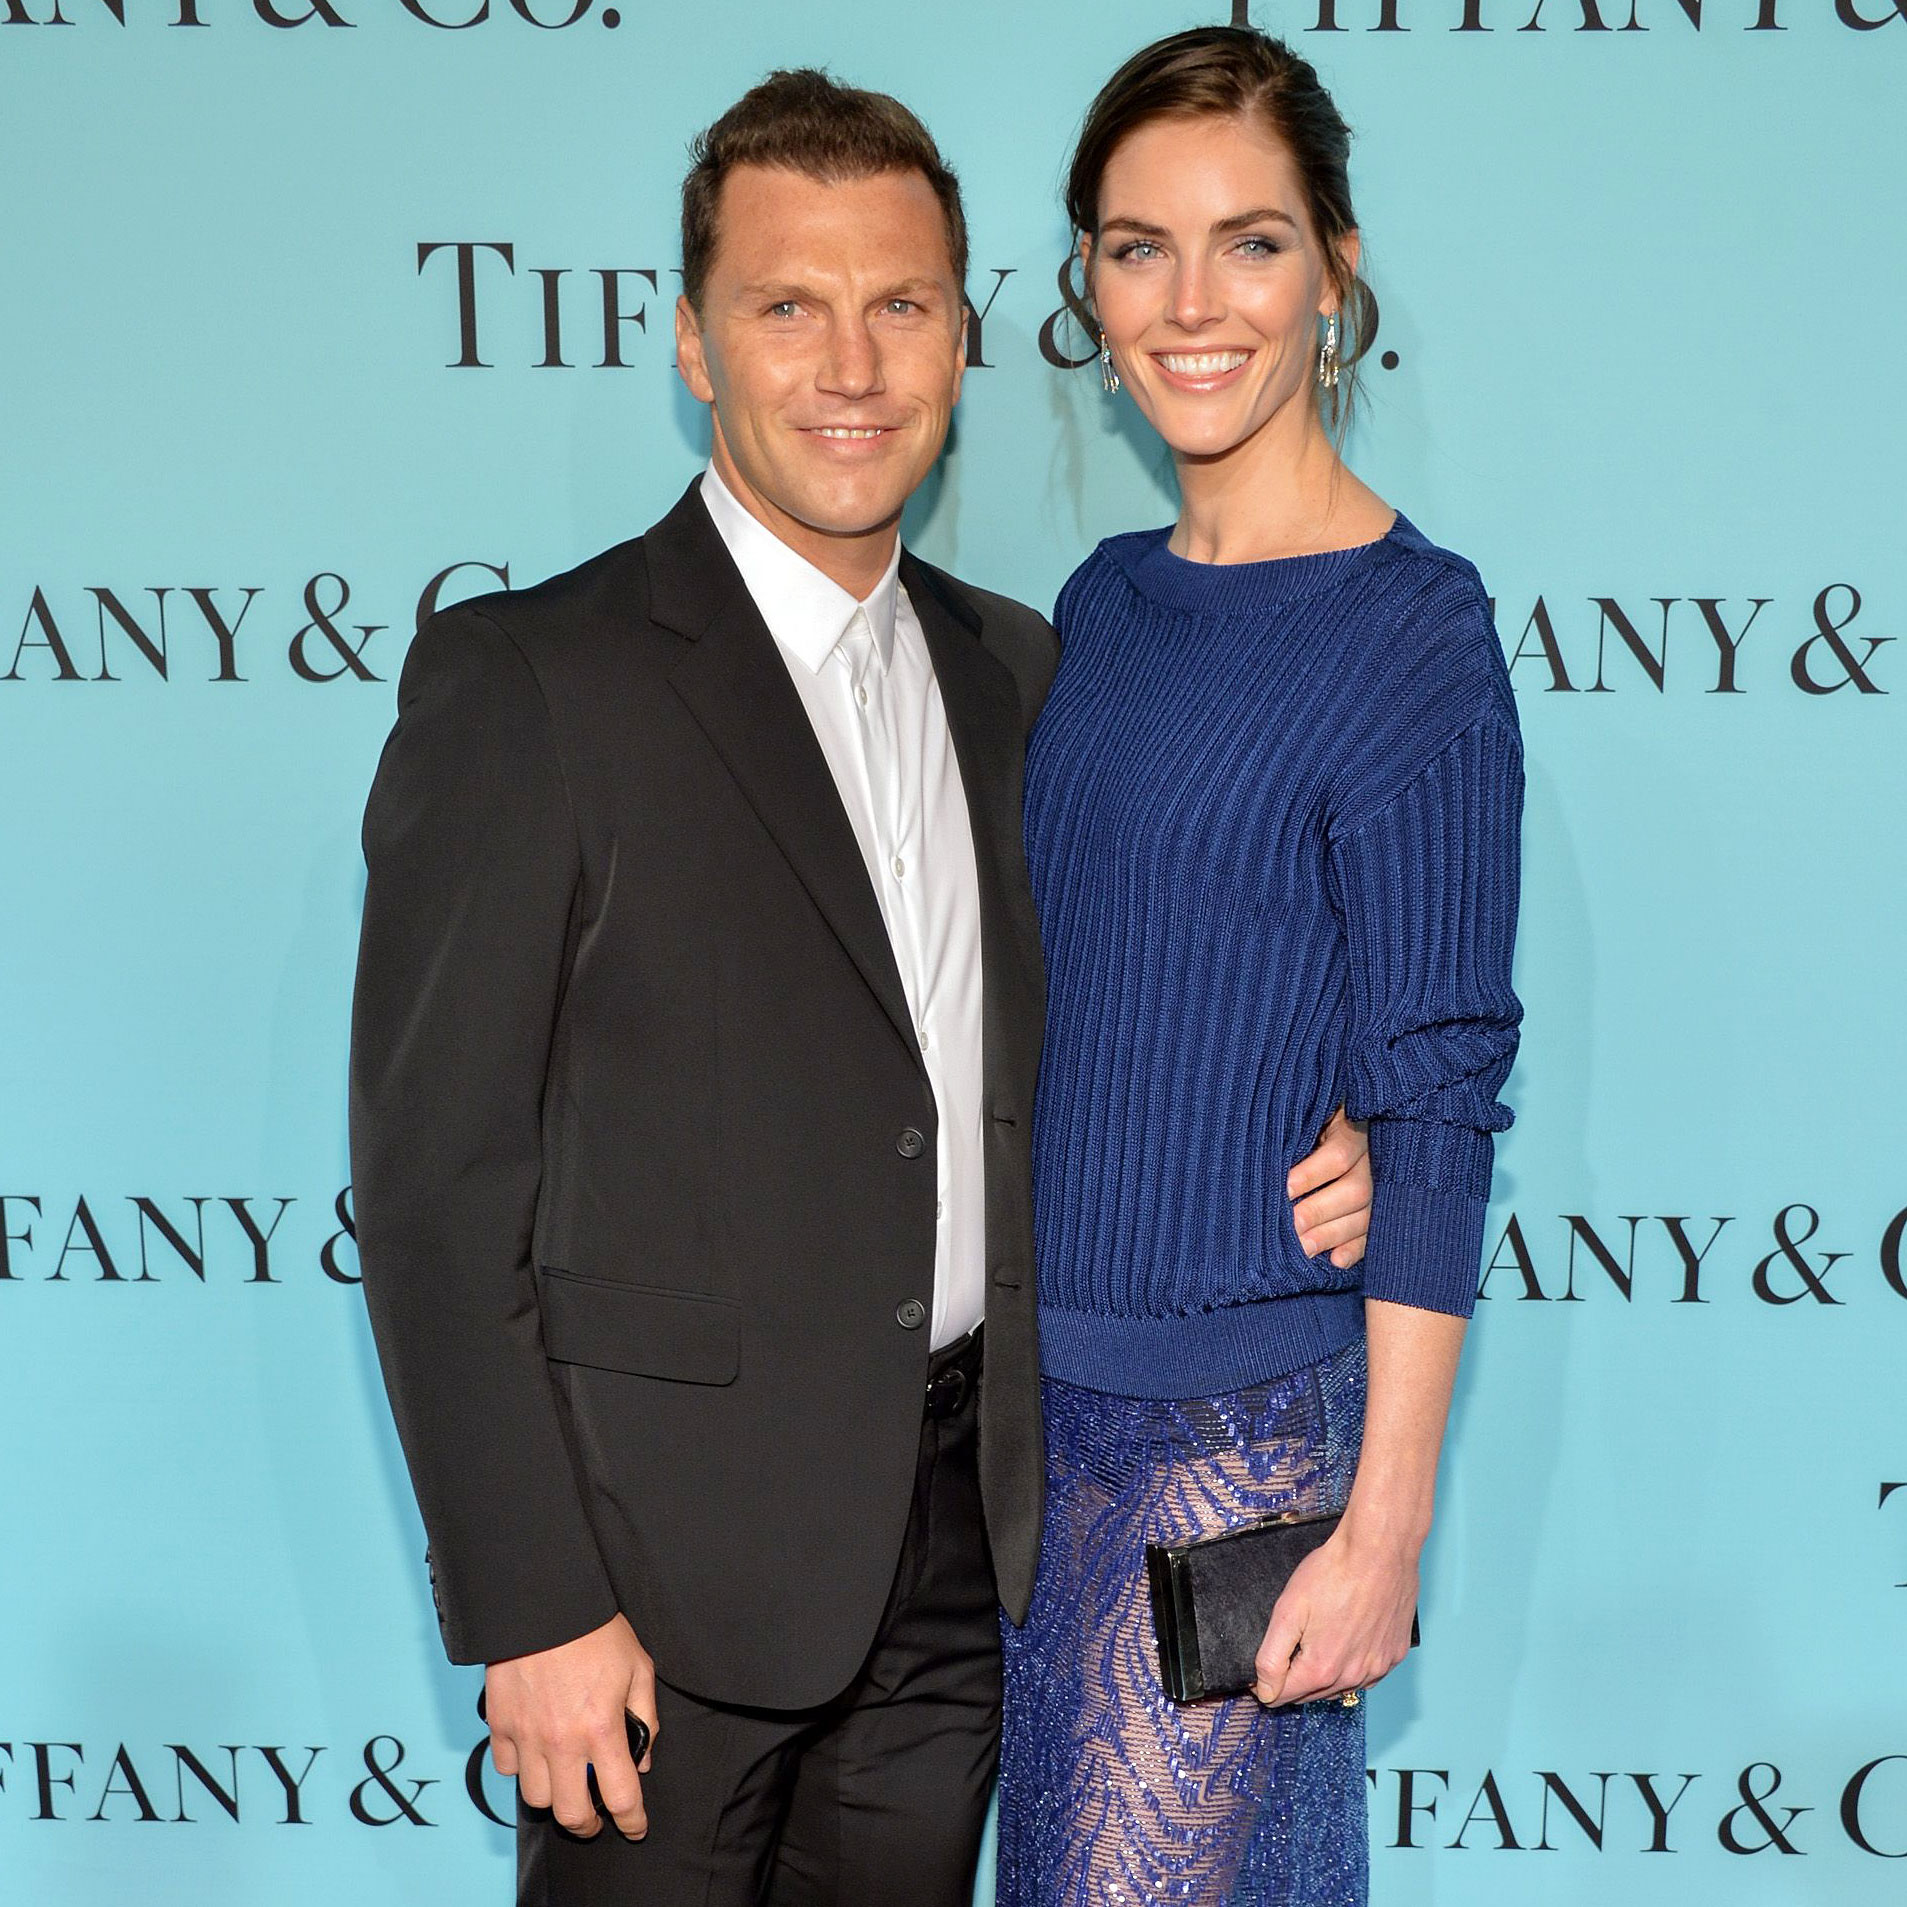 Hilary Rhoda Reportedly Files for Divorce From Sean Avery